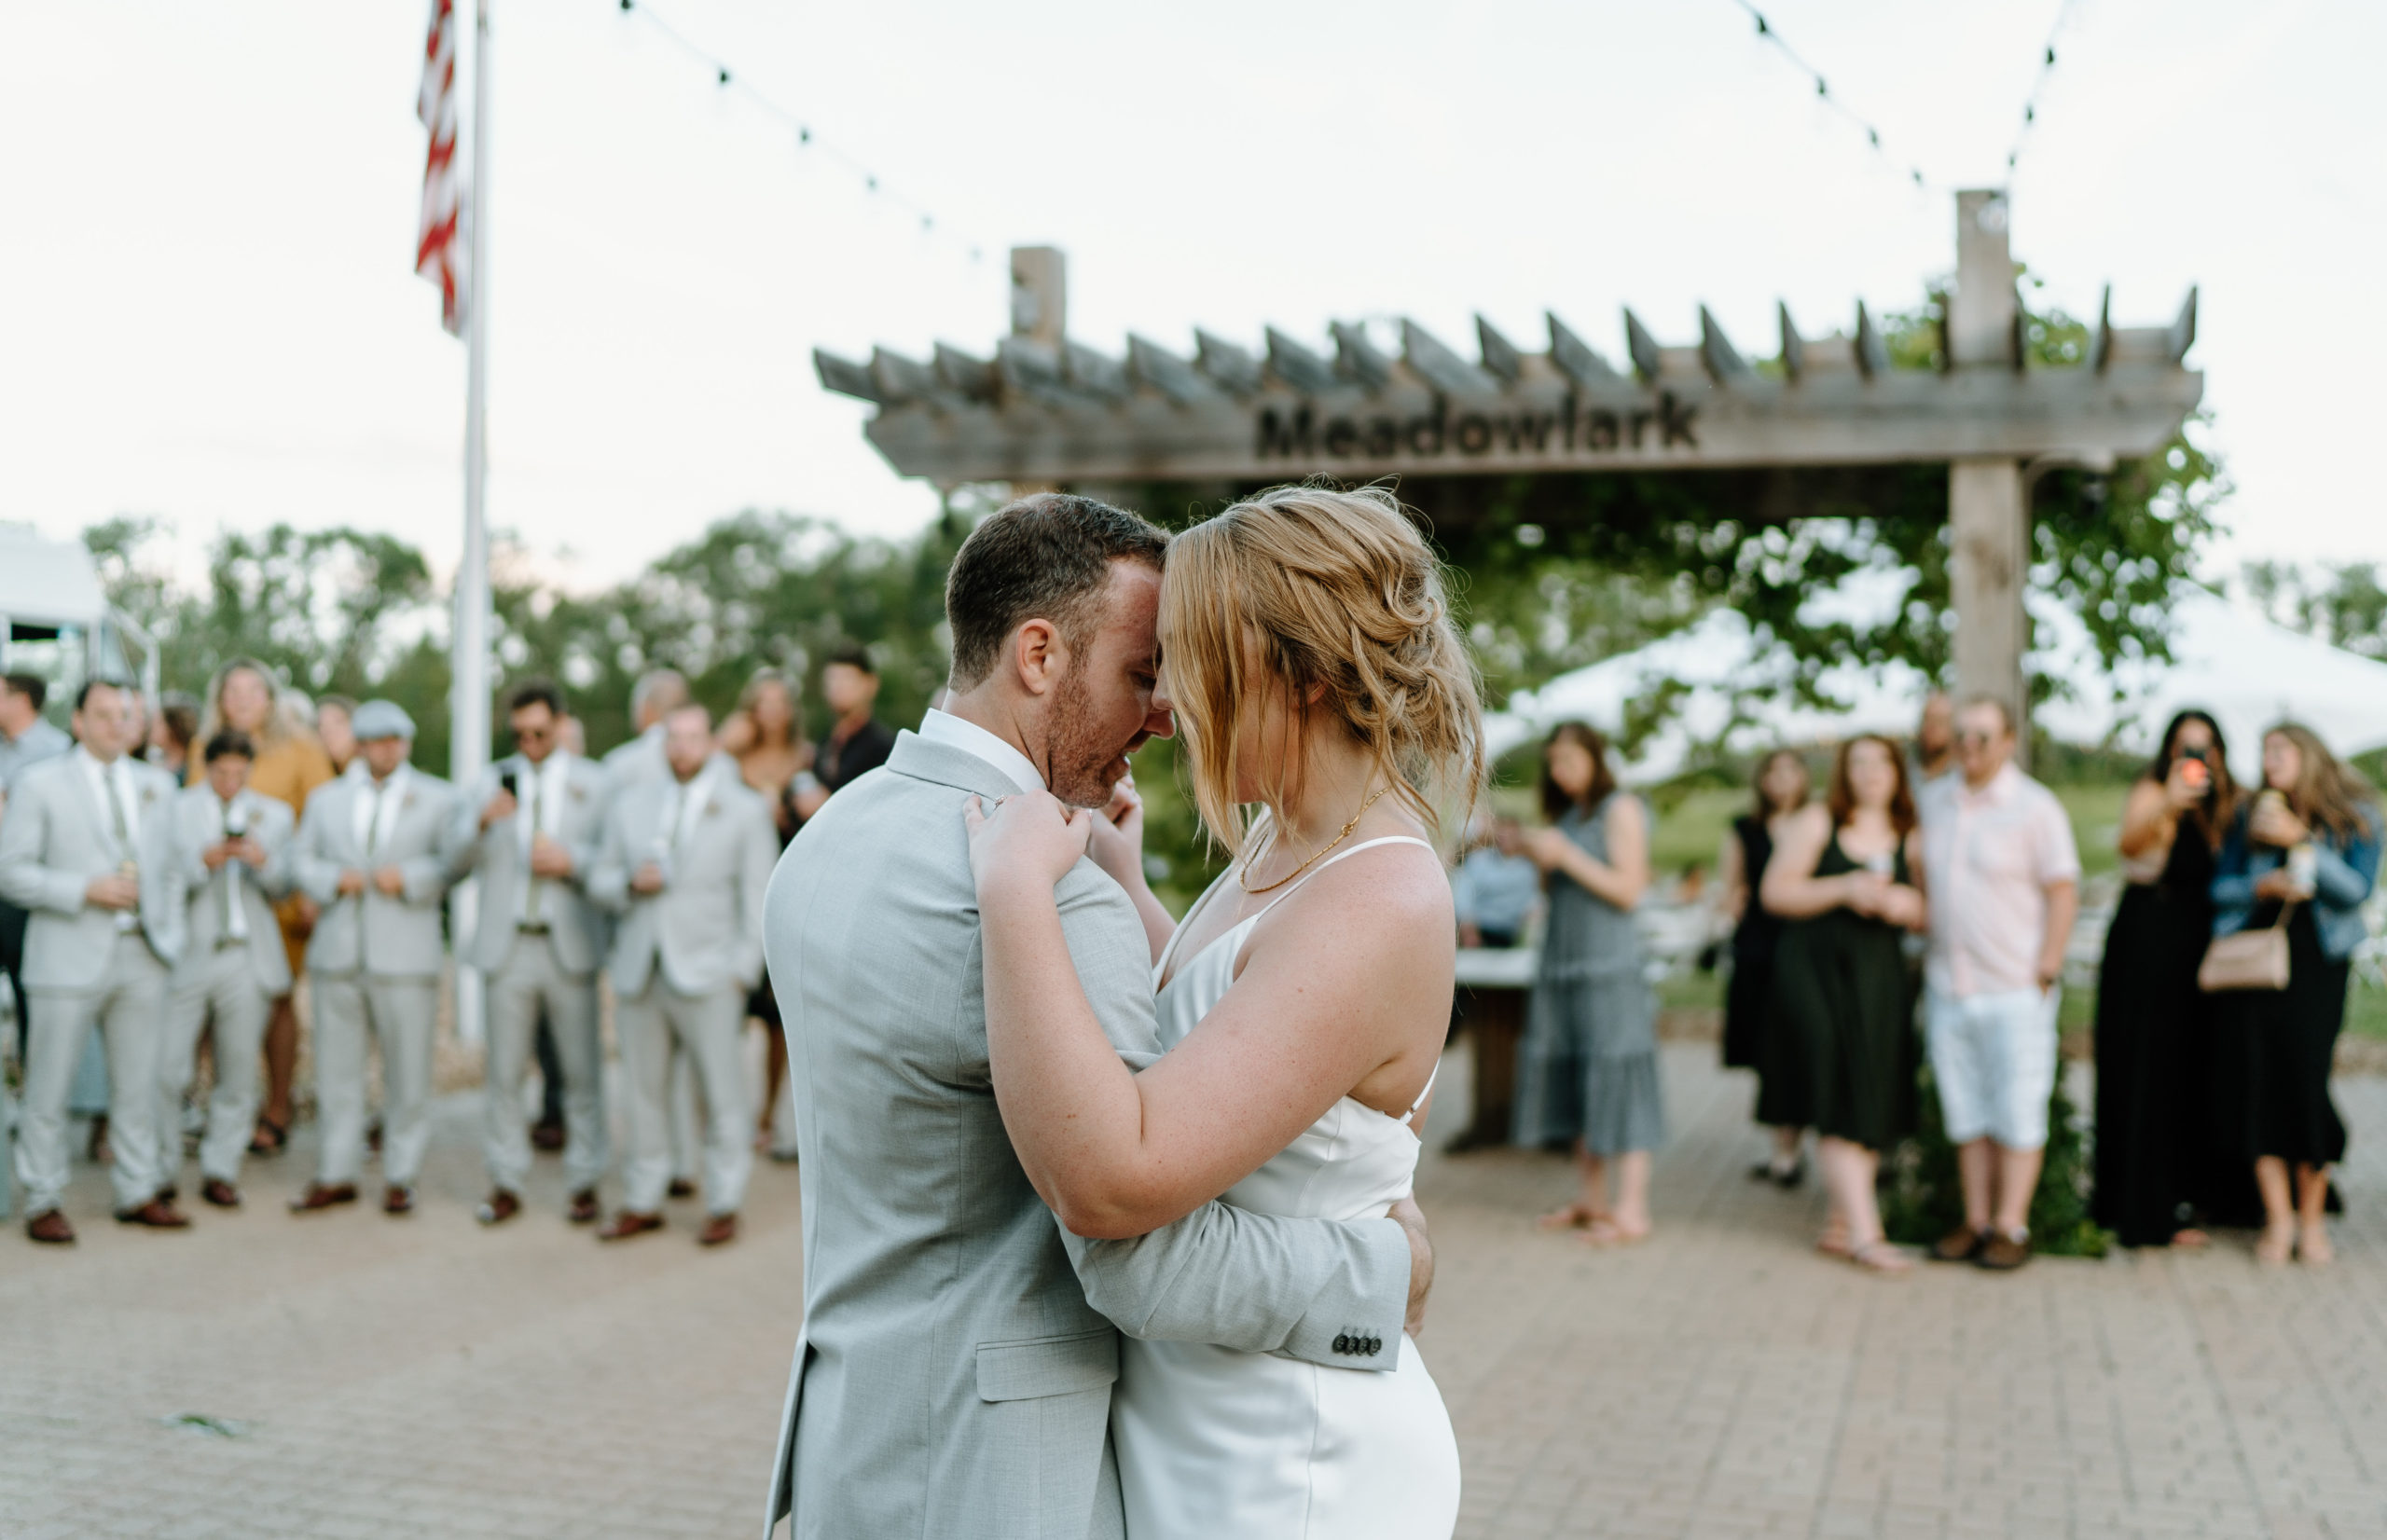 This is a bride and groom celebrating at their reception at Indian Creek Nature Center in Cedar Rapids, IA